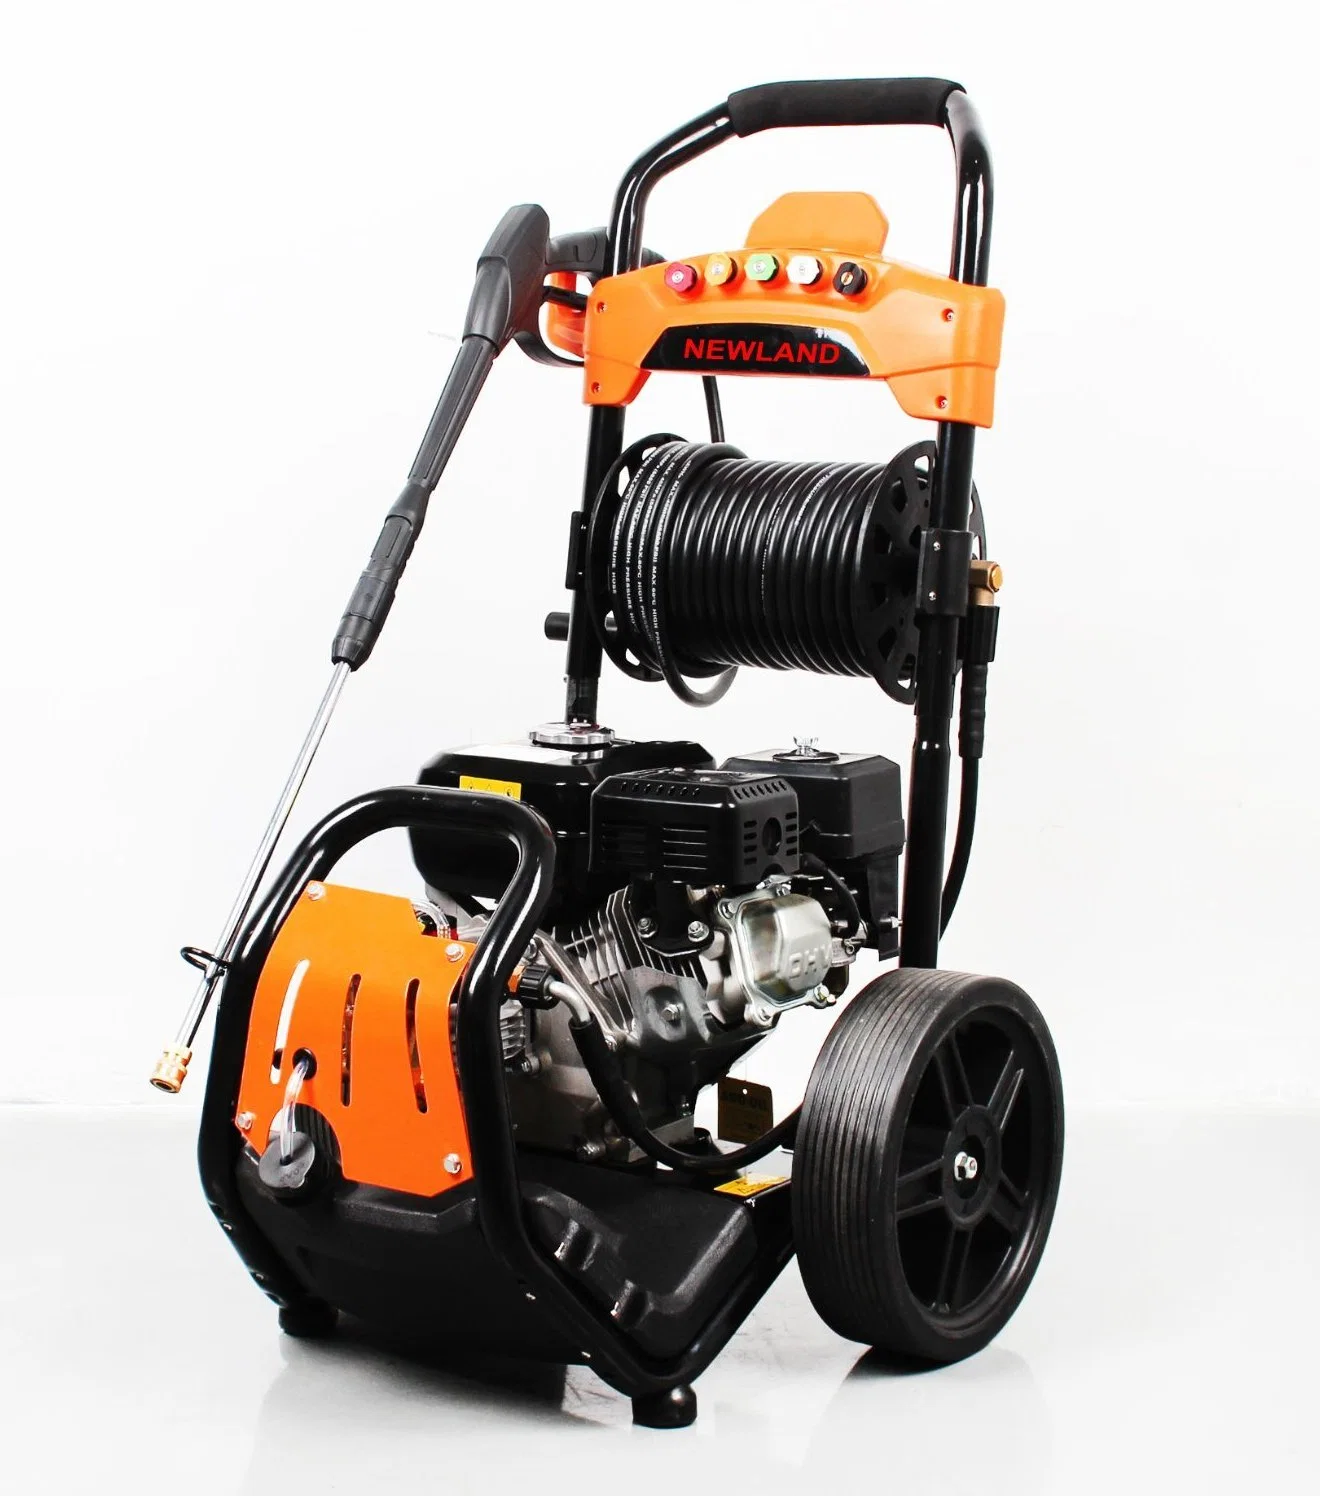 170bar 2500psi High Pressure Power Washer for Car